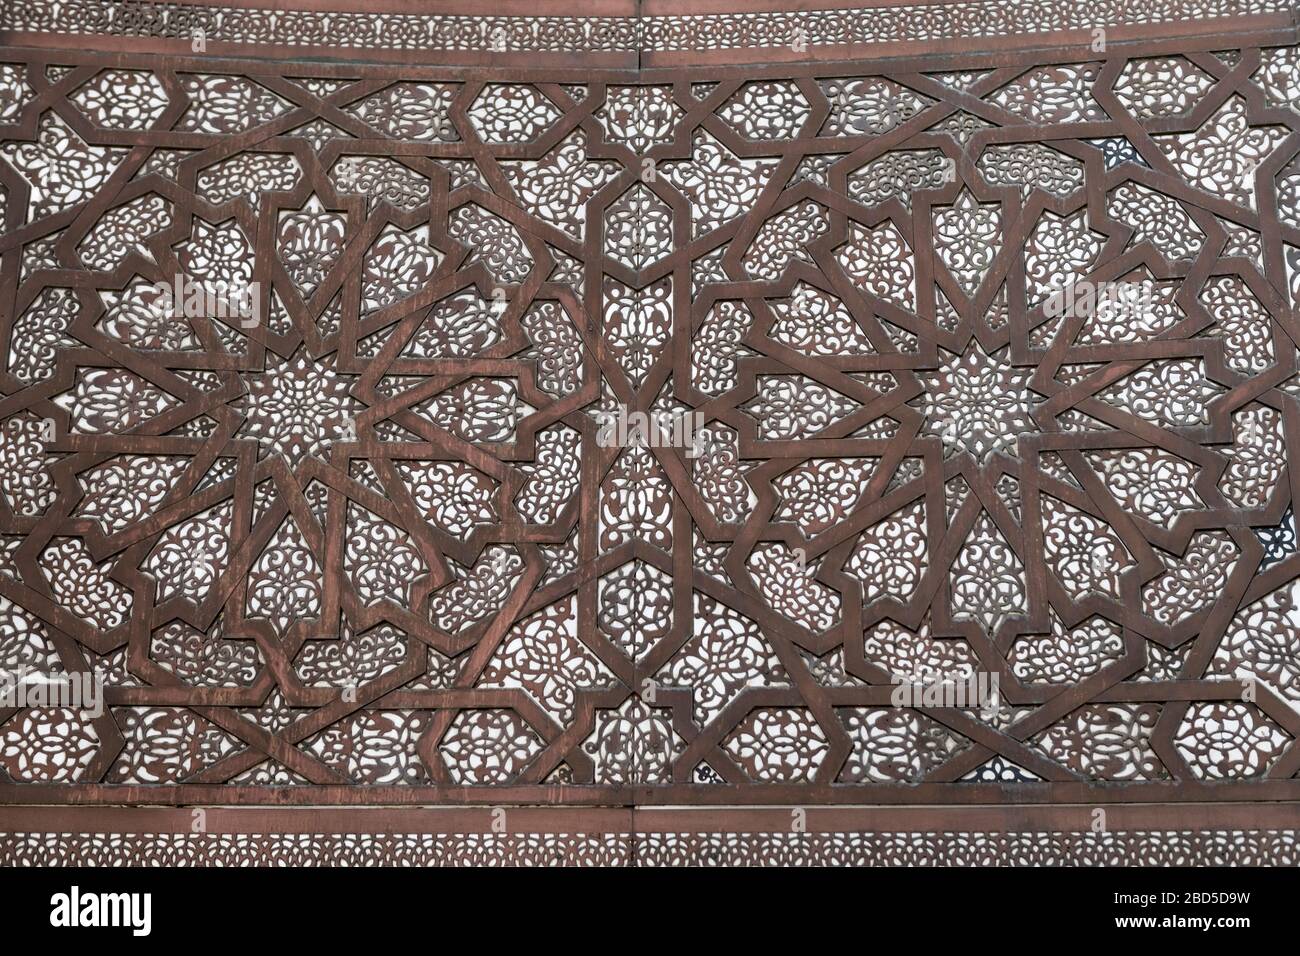 Beautiful intricate geometric, Islamic design. Architectural detail from the mosque Hassan II in Casablanca, Morocco. Stock Photo